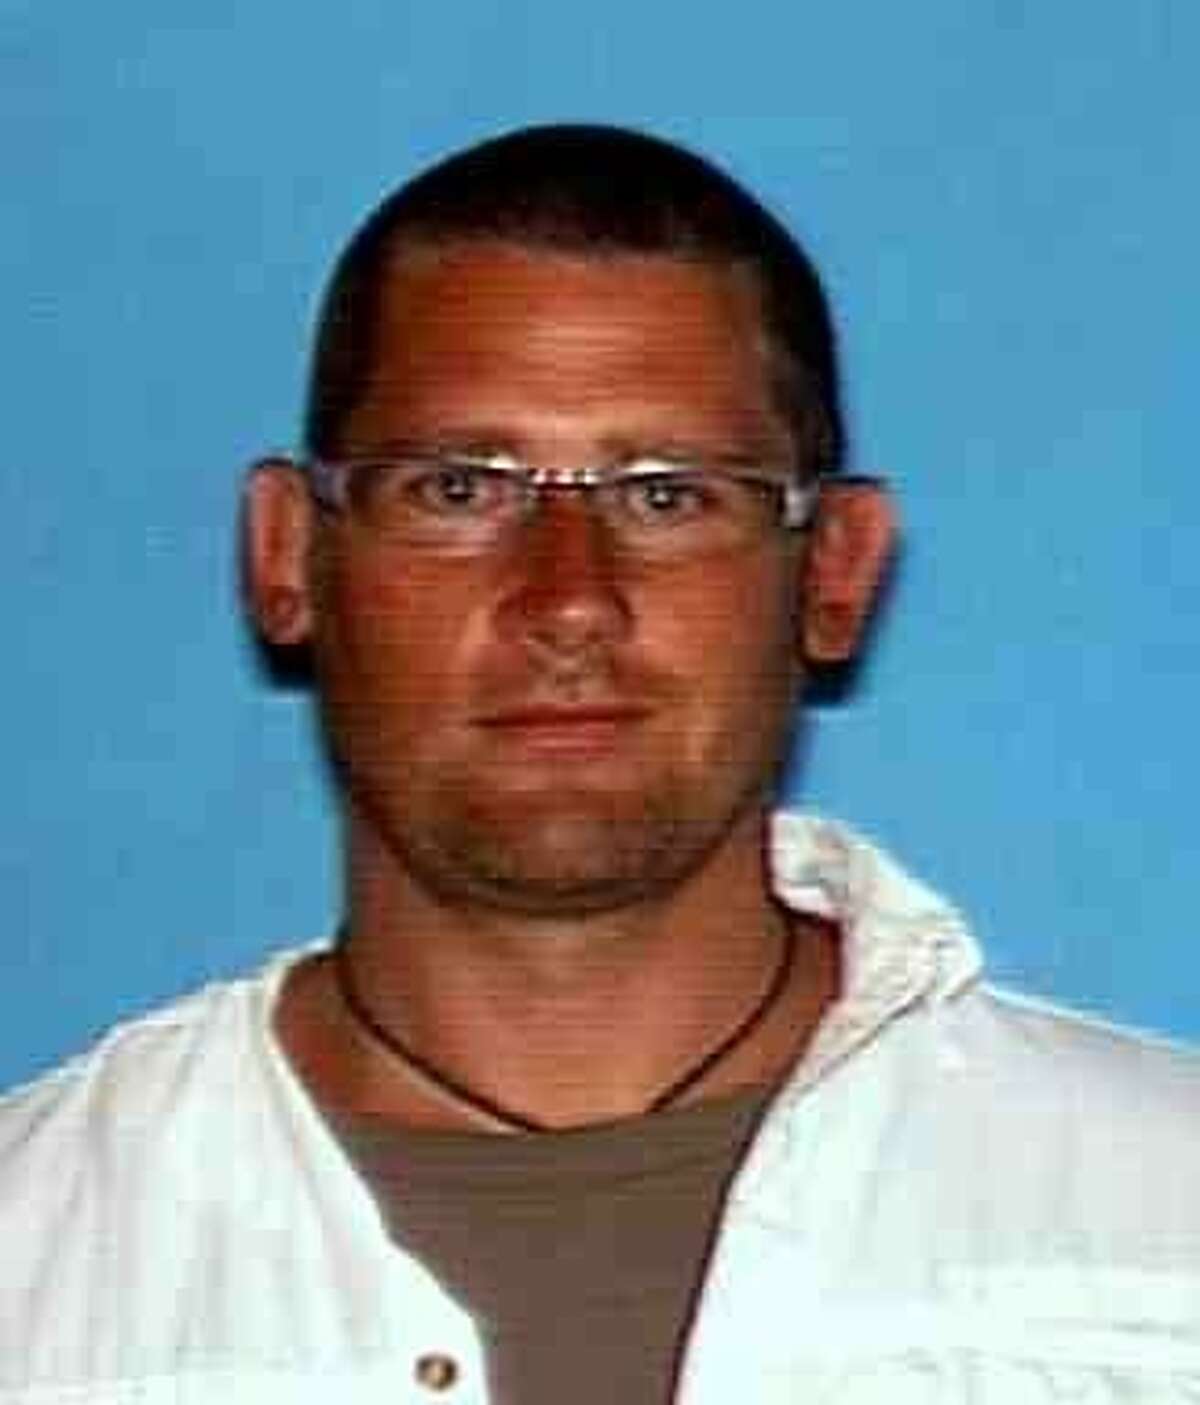 Federal agents were searching for Ryan Kelly Chamberlain II in connection with a raid in San Francisco on Saturday, May 31, 2014. An FBI official said Chamberlain is considered armed and dangerous, and driving a white Nissan Altima with California or Texas plates.